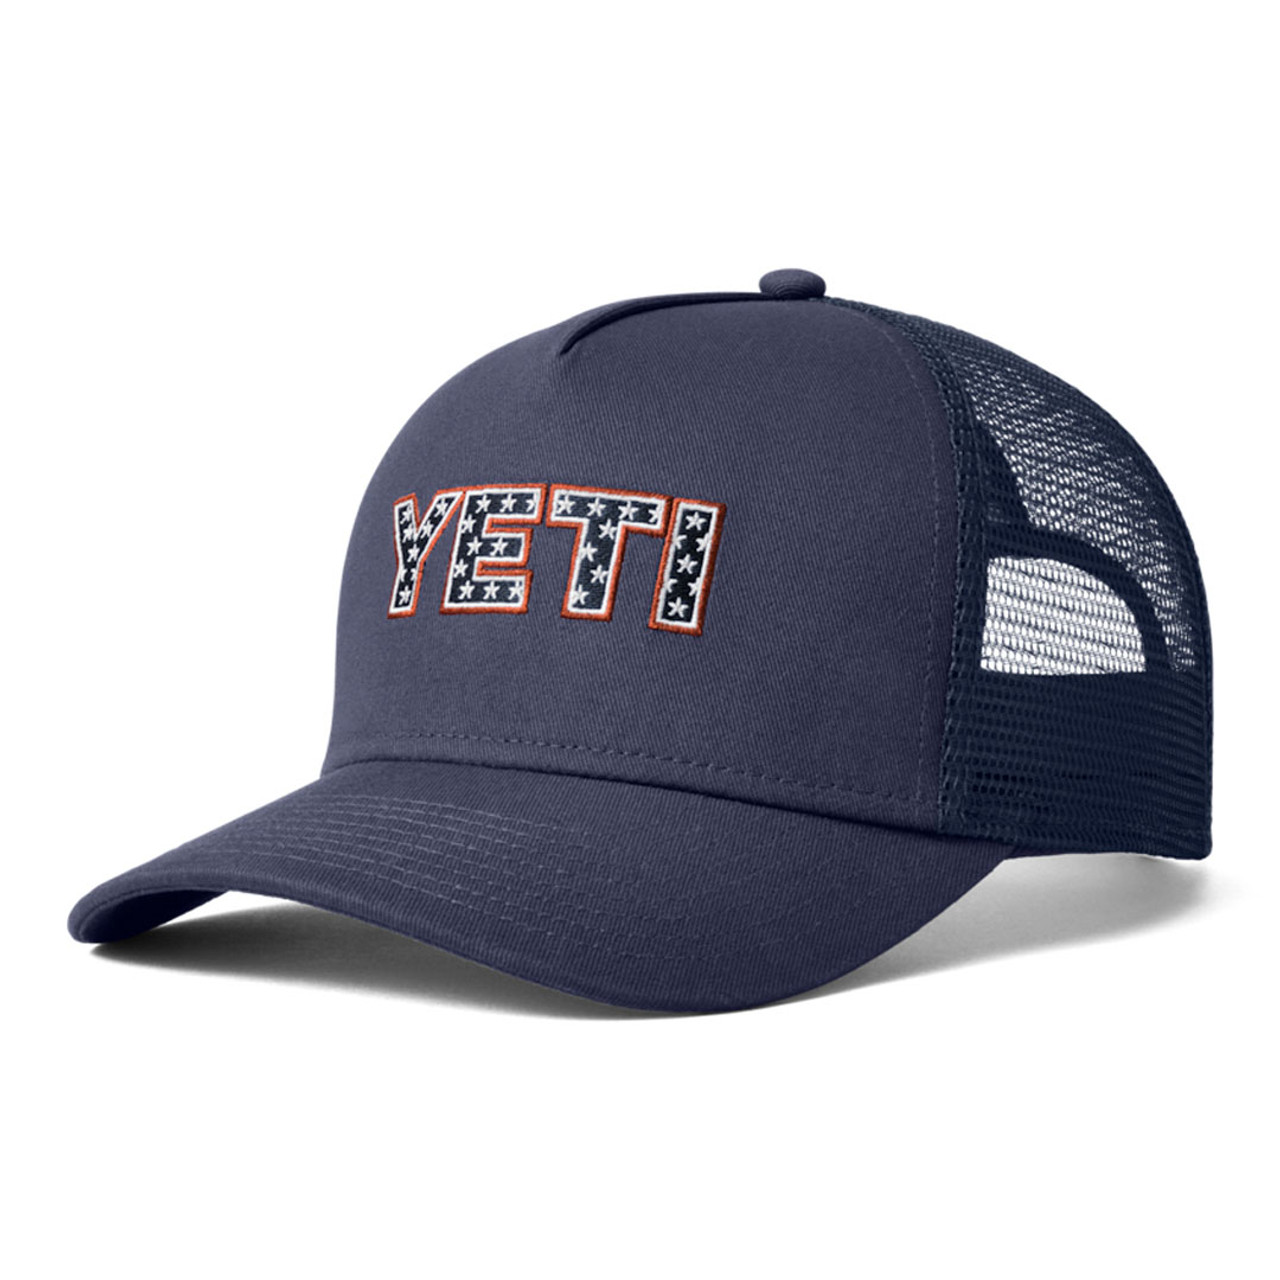 https://cdn11.bigcommerce.com/s-ppsyskcavg/images/stencil/1280x1280/products/67166/239842/W-230081_July_4th_Campaign_site_studio_apparel_M_Hat_Star_Badge_Blue_3qtr_12515_Primary_B_2400x2400__63115.1686065131.jpg?c=2?imbypass=on